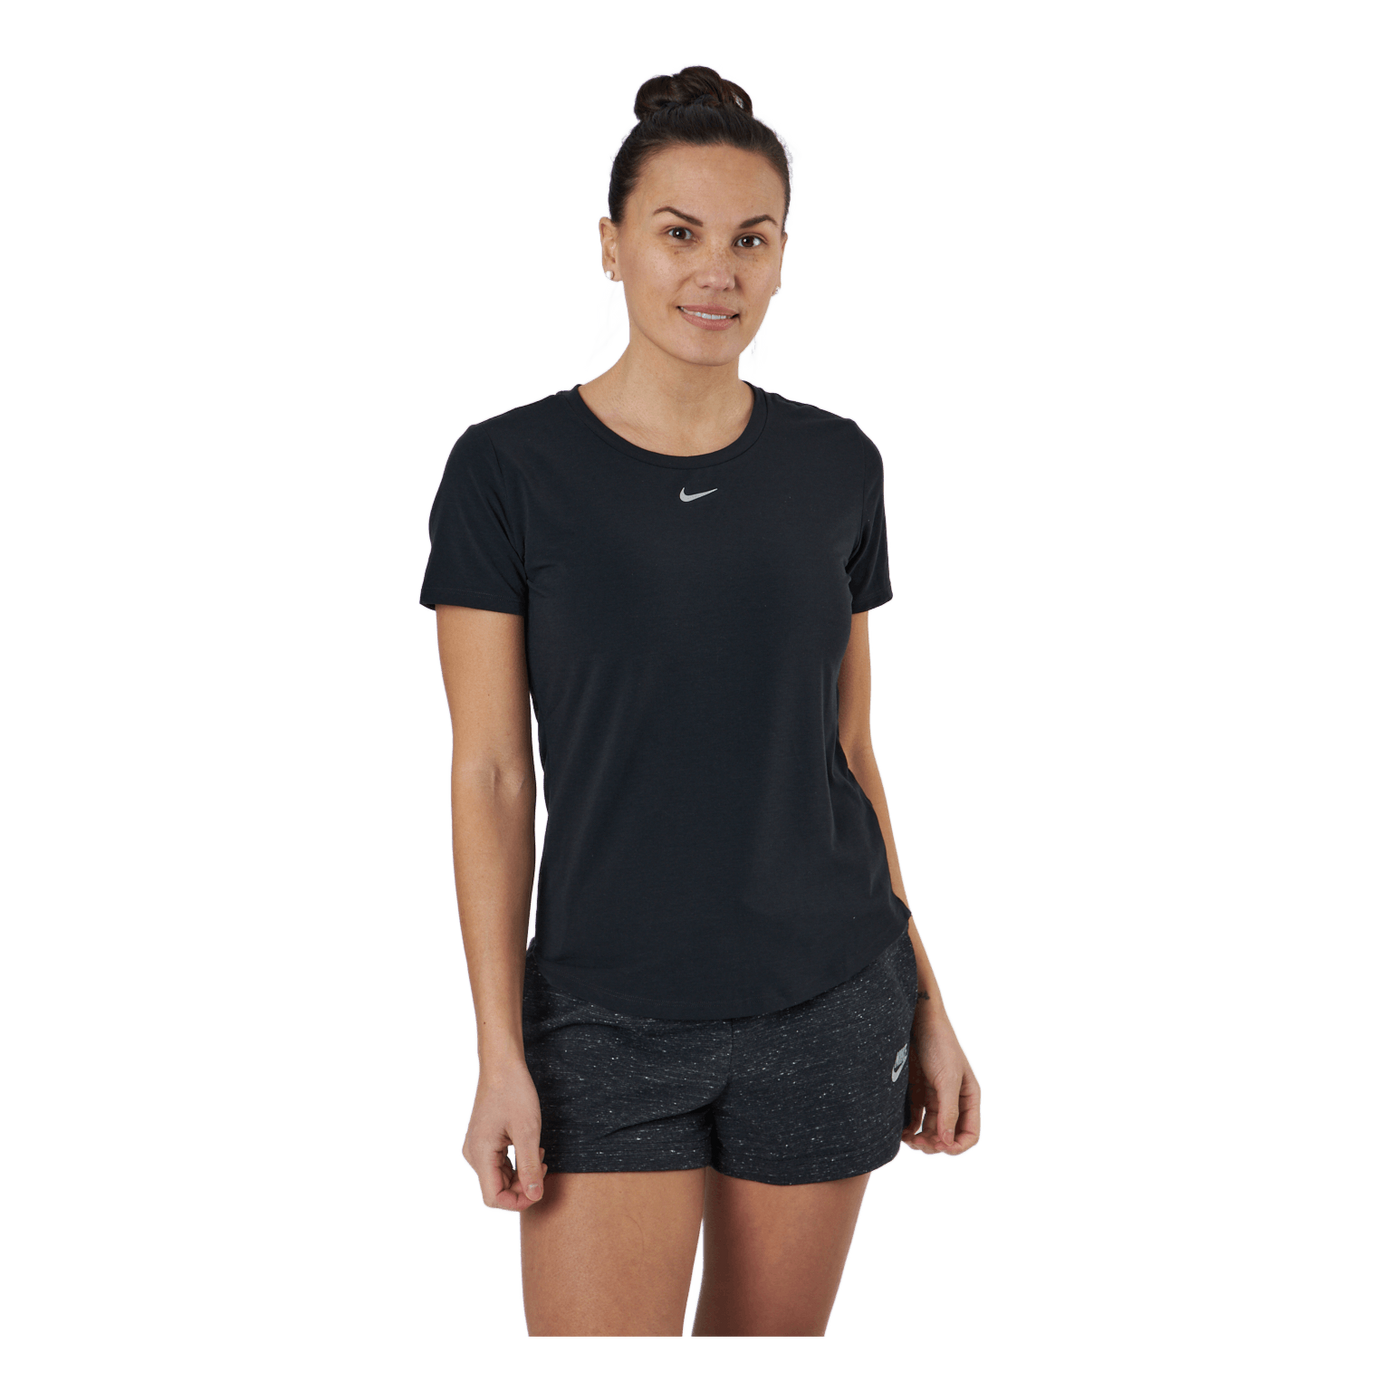 Dri-FIT One Luxe Women's Standard Fit Short-Sleeve Top BLACK/REFLECTIVE SILV